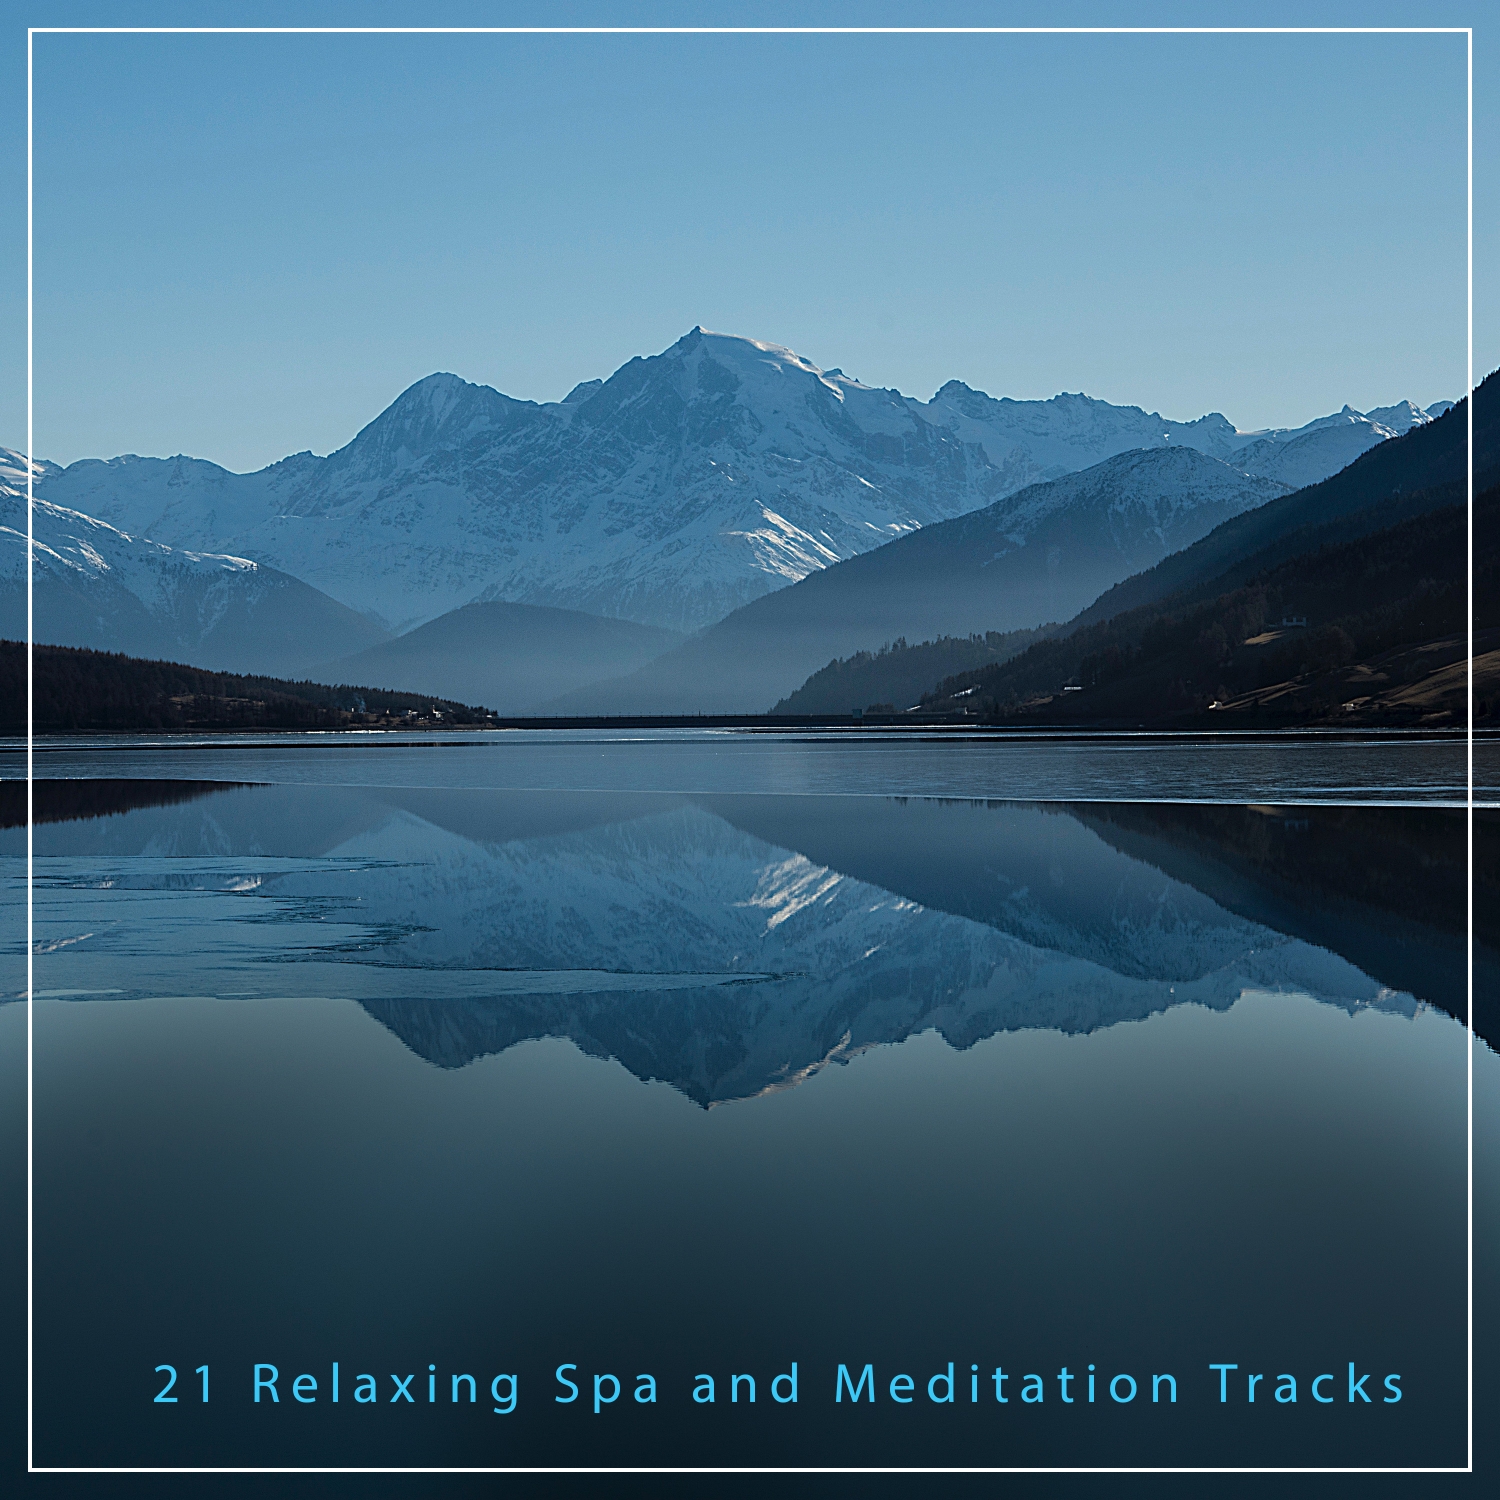 21 Relaxing Spa and Meditation Tracks